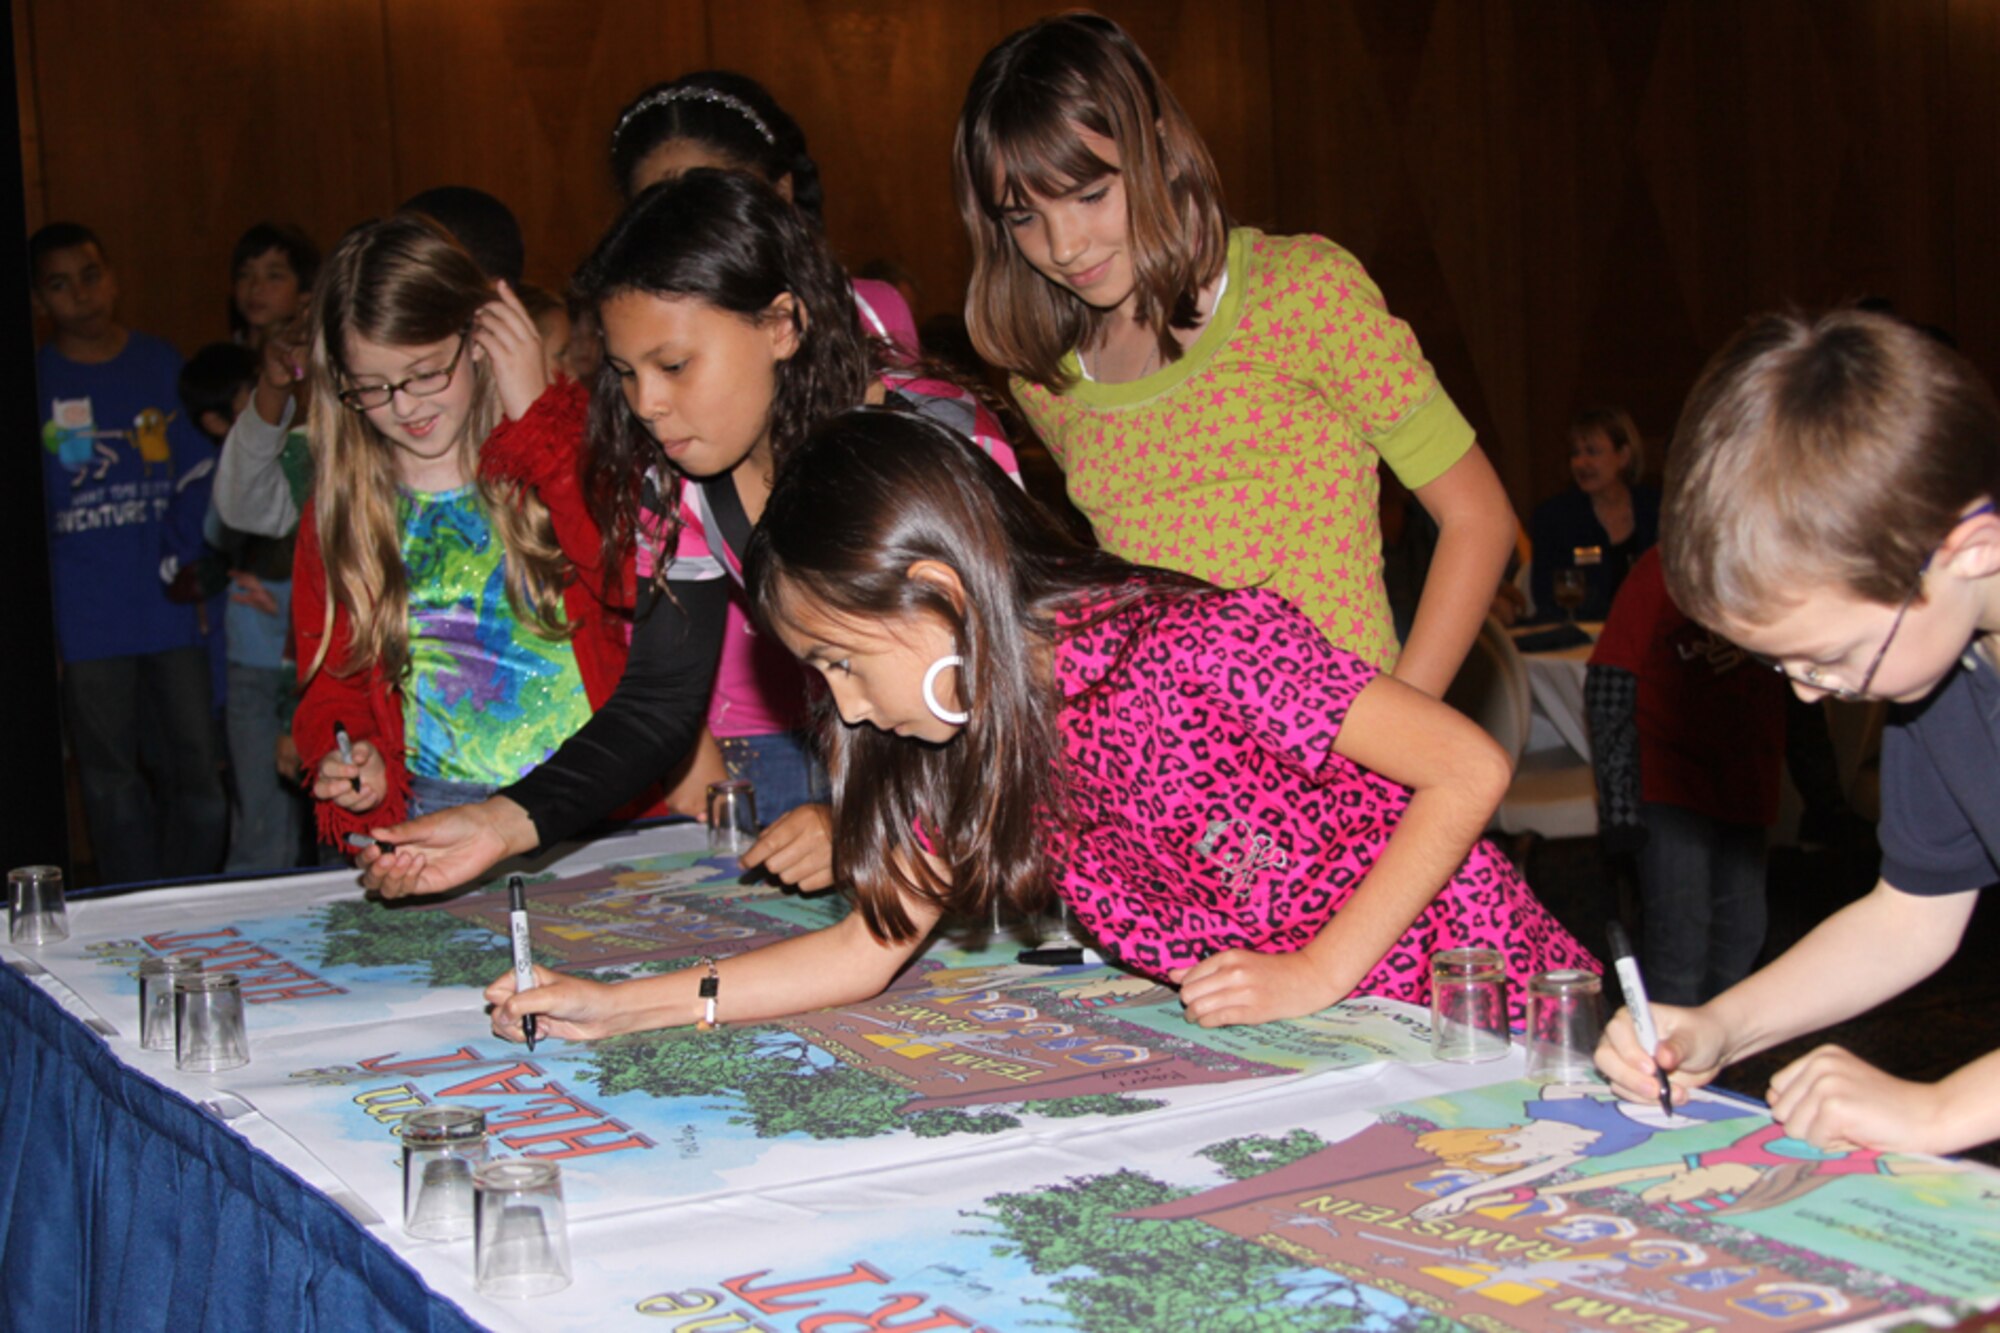 Some of the authors of 'From the Heart, (from left) Isabelle Trautman, Raisa Wargel, Maddie Morse, Ally Hensley, Ryan Clancy sign book posters.
